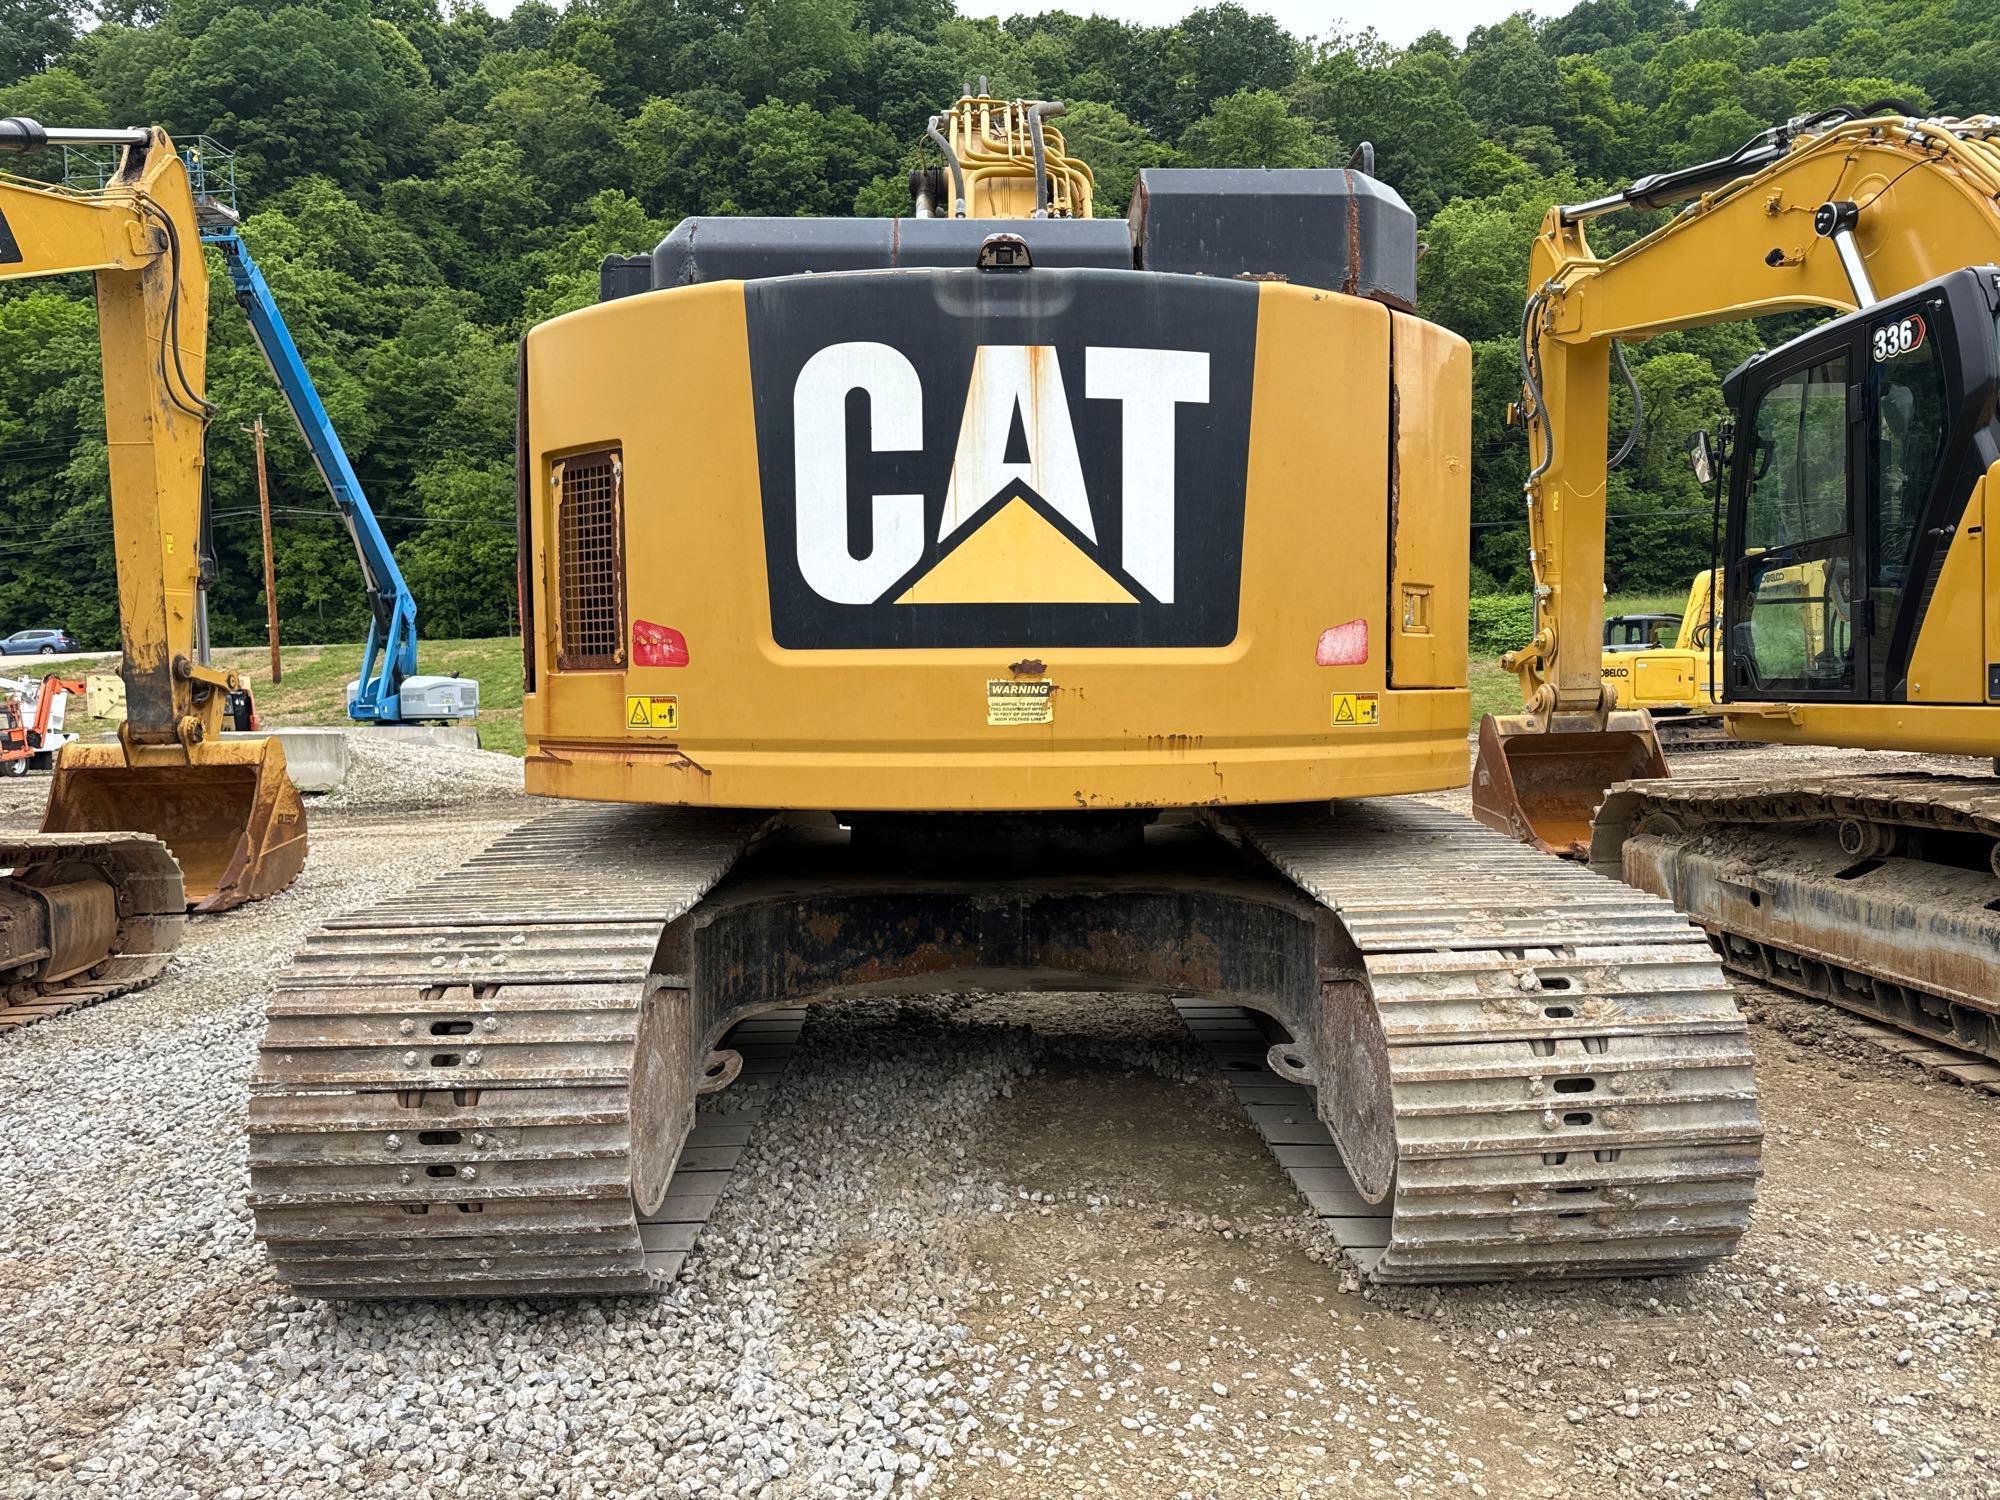 2016 CAT 335FLCR HYDRAULIC EXCAVATOR SN:KNE00510 powered by Cat C7.1 diesel engine, equipped with